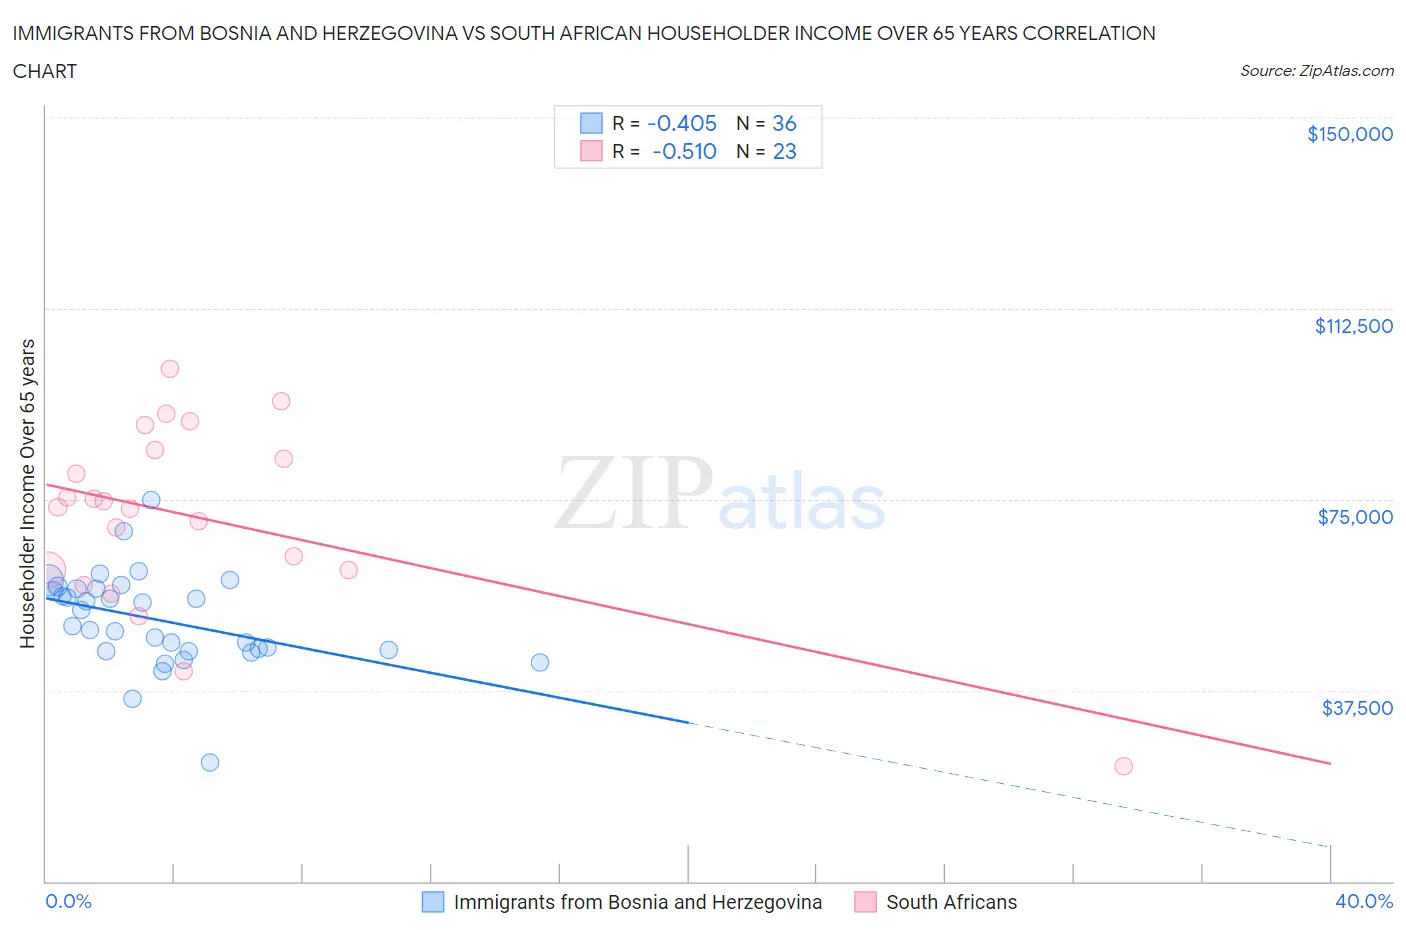 Immigrants from Bosnia and Herzegovina vs South African Householder Income Over 65 years